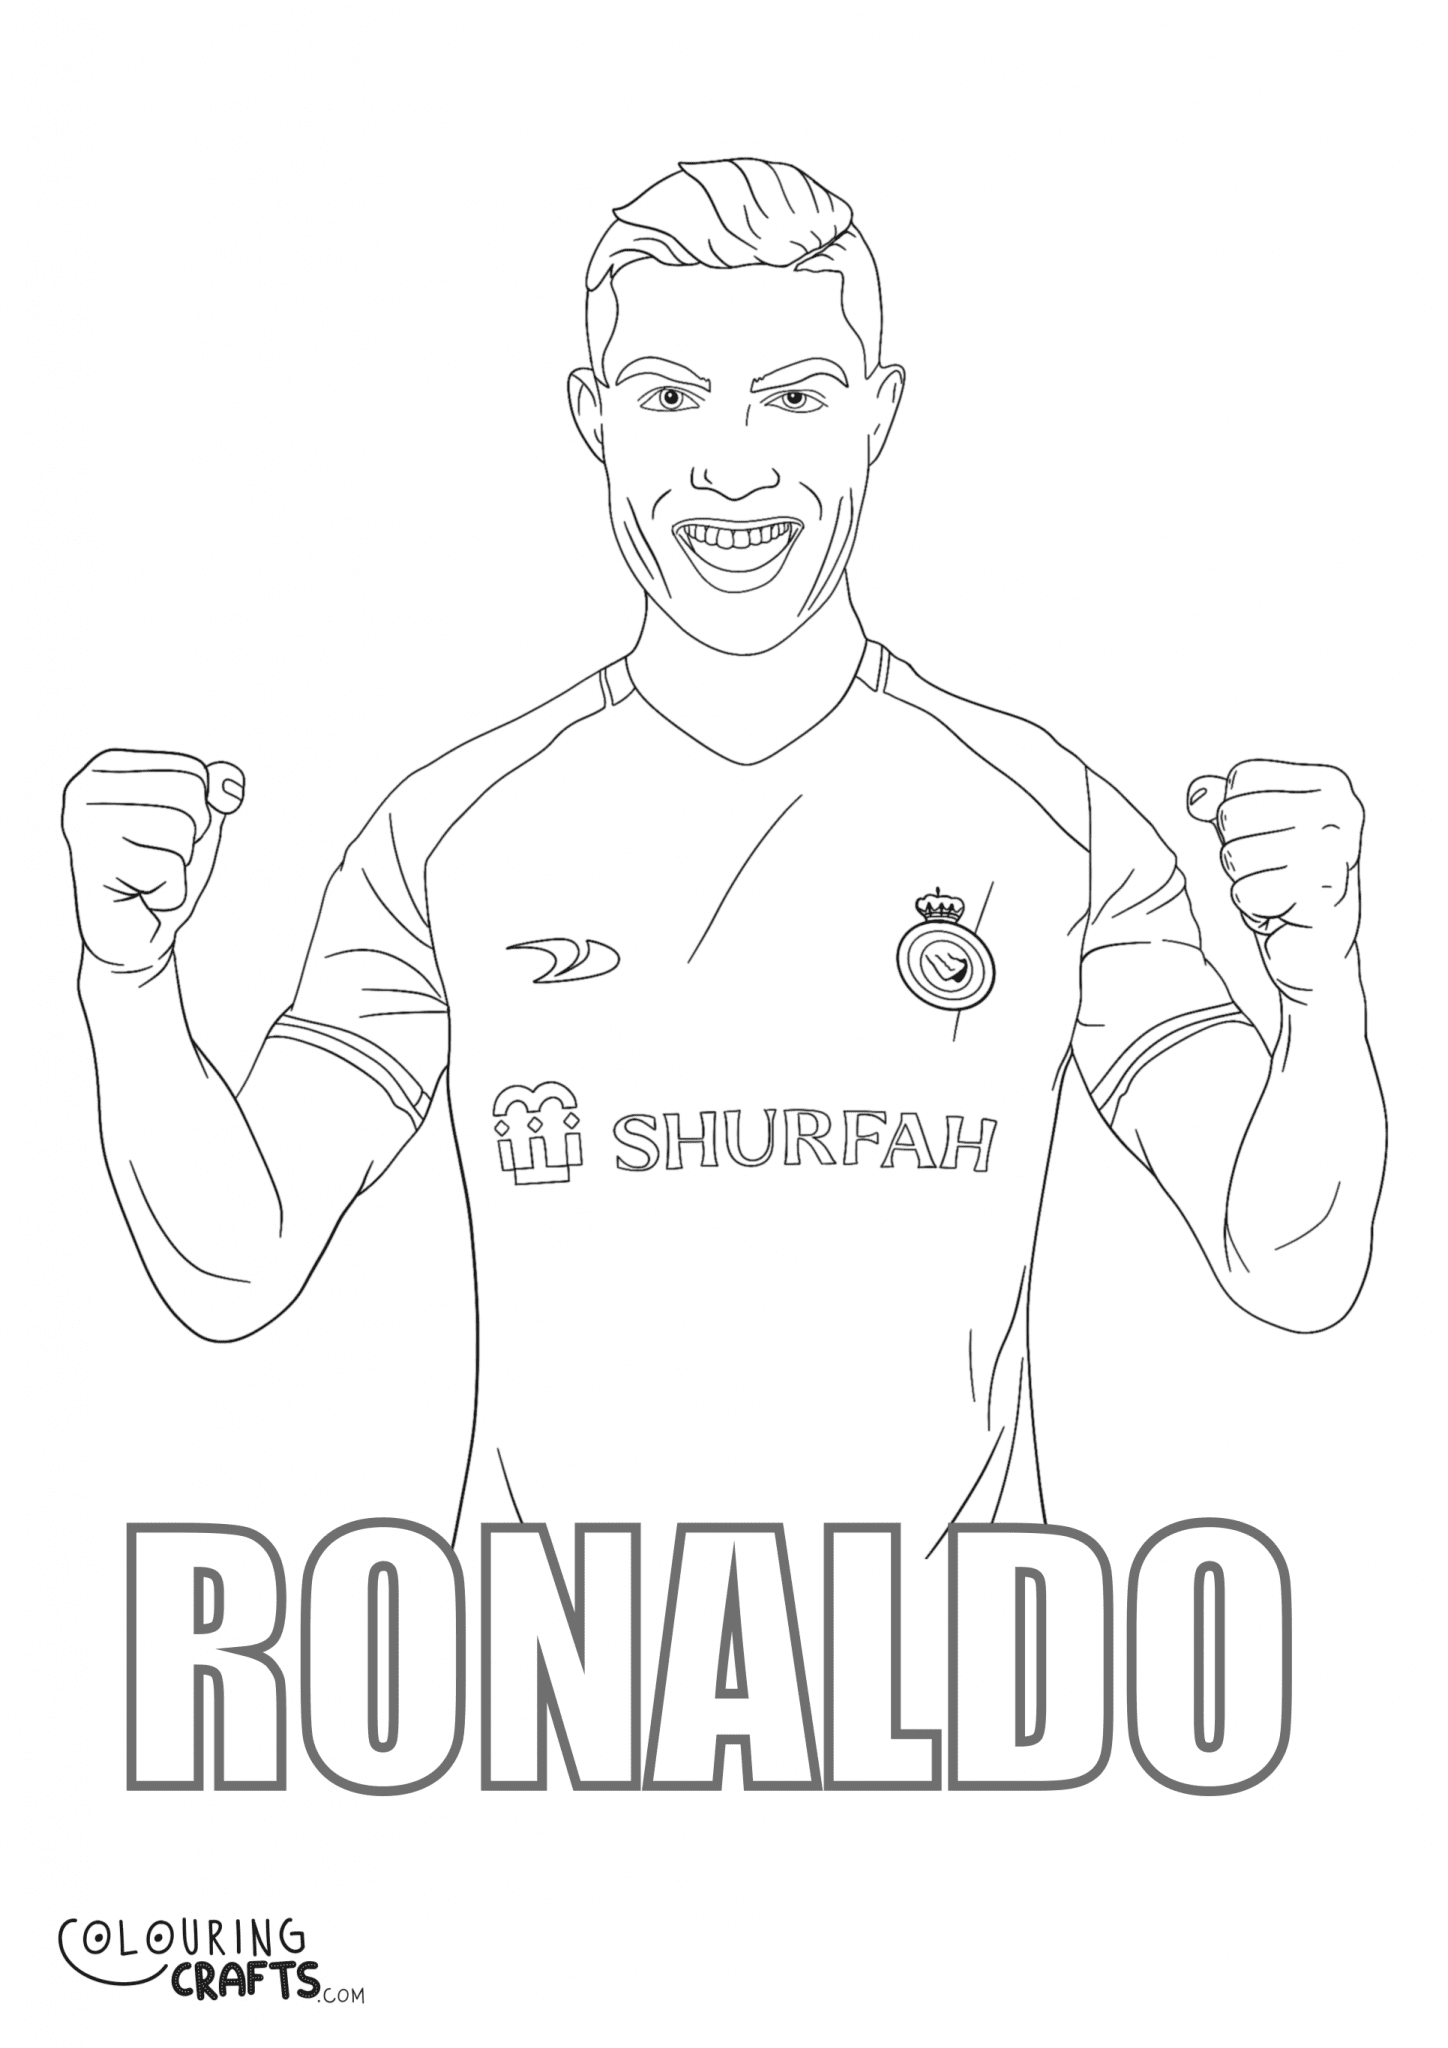 Ronaldo With Name Colouring Page - Colouring Crafts